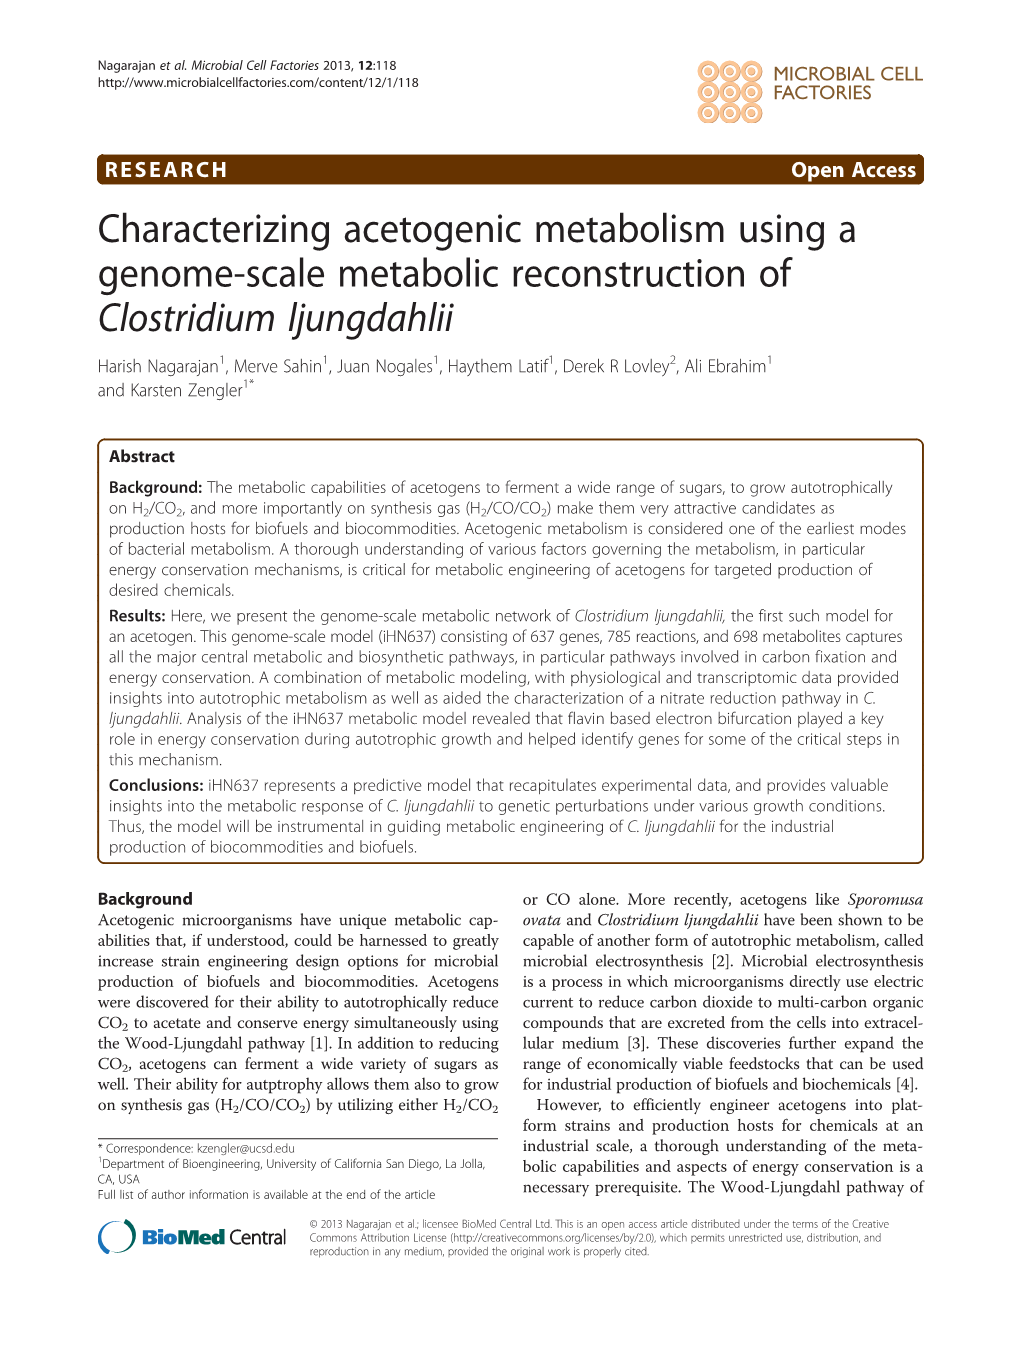 Characterizing Acetogenic Metabolism Using a Genome-Scale Metabolic